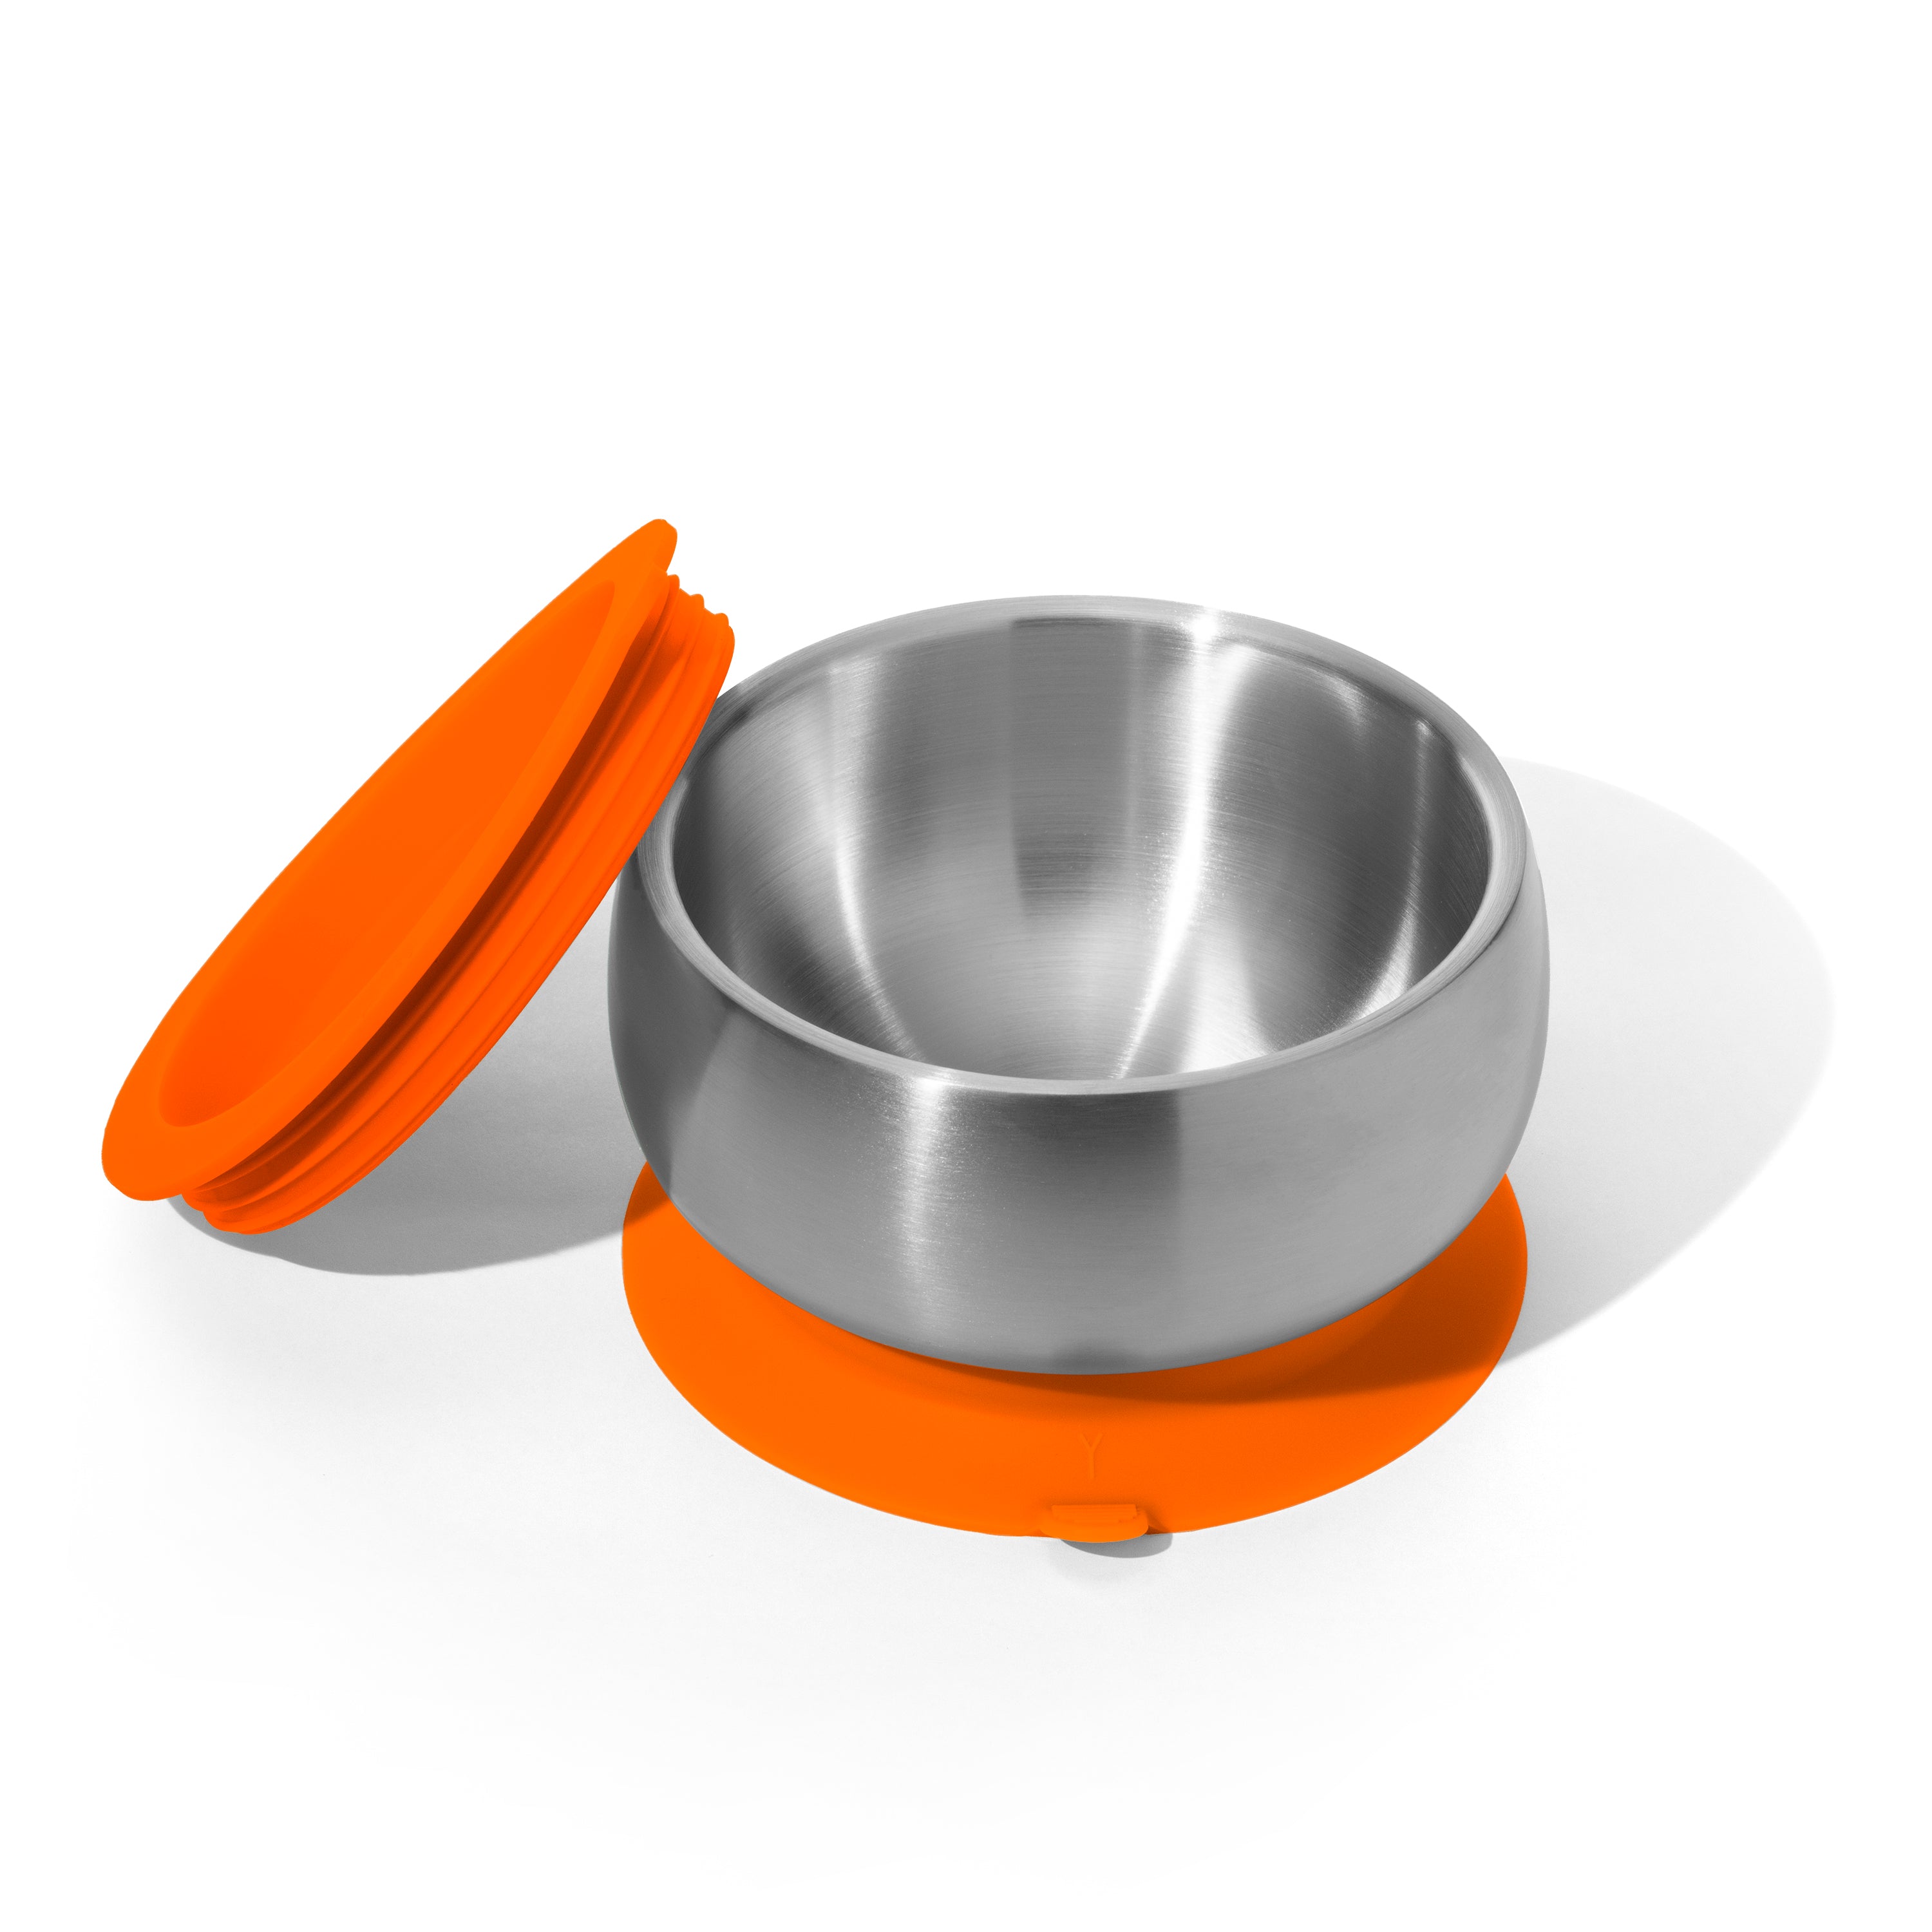 Avanchy Stainless Steel Baby Bowl With Lid - Orange